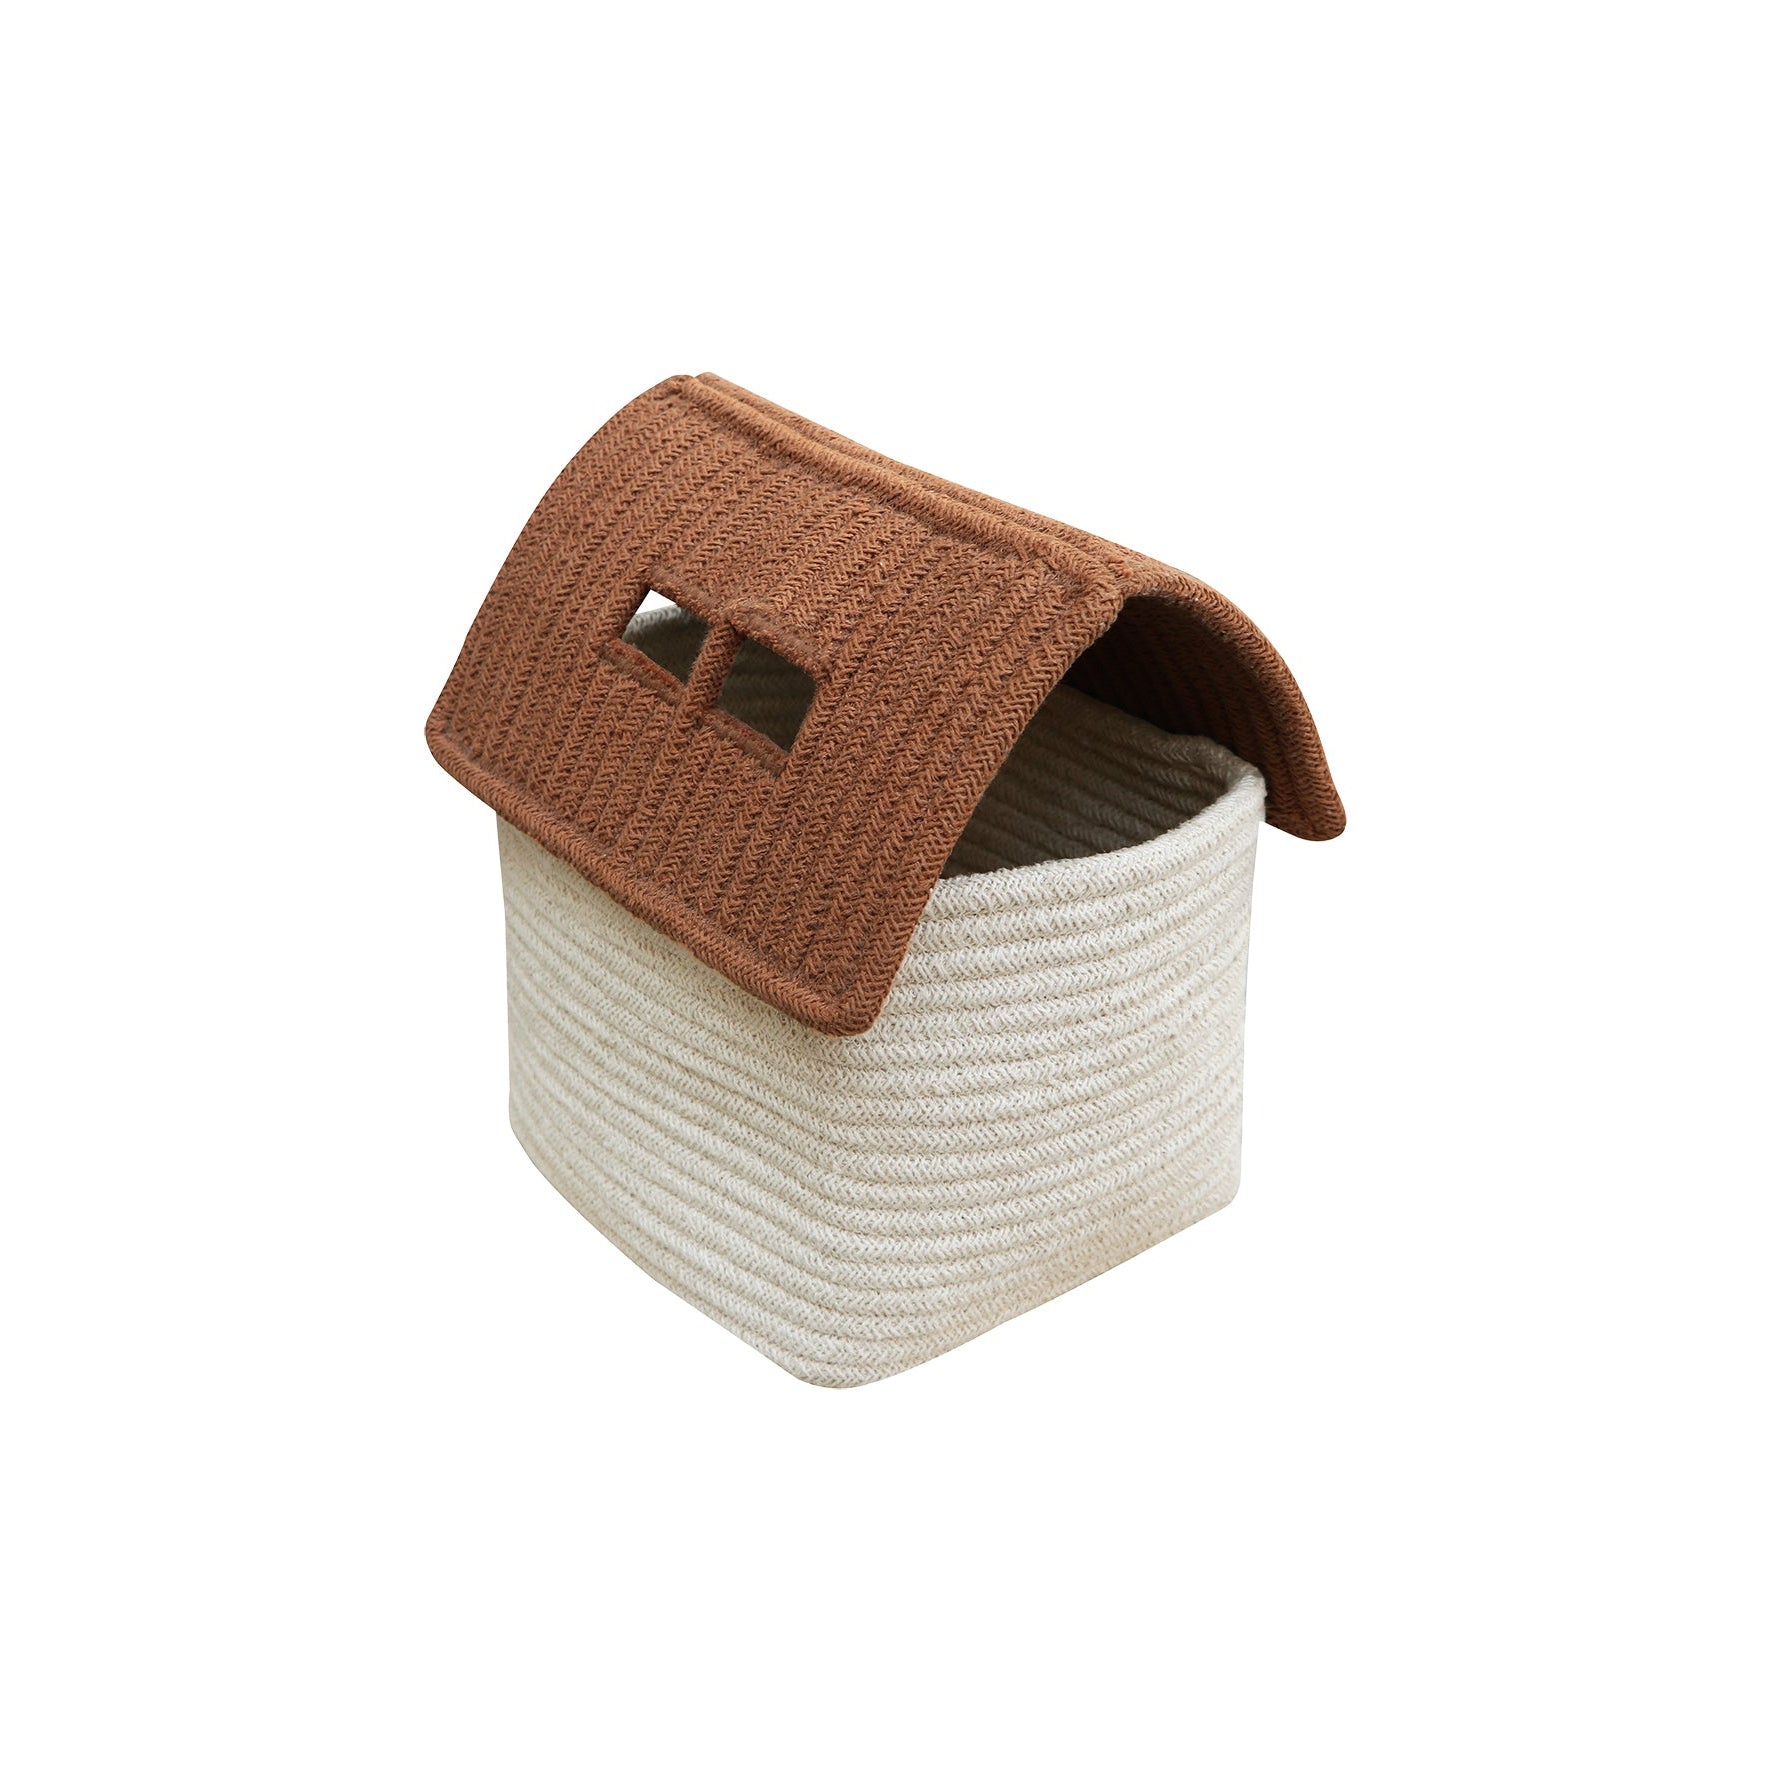 Lorena Canals Eco-City Toffee House Basket